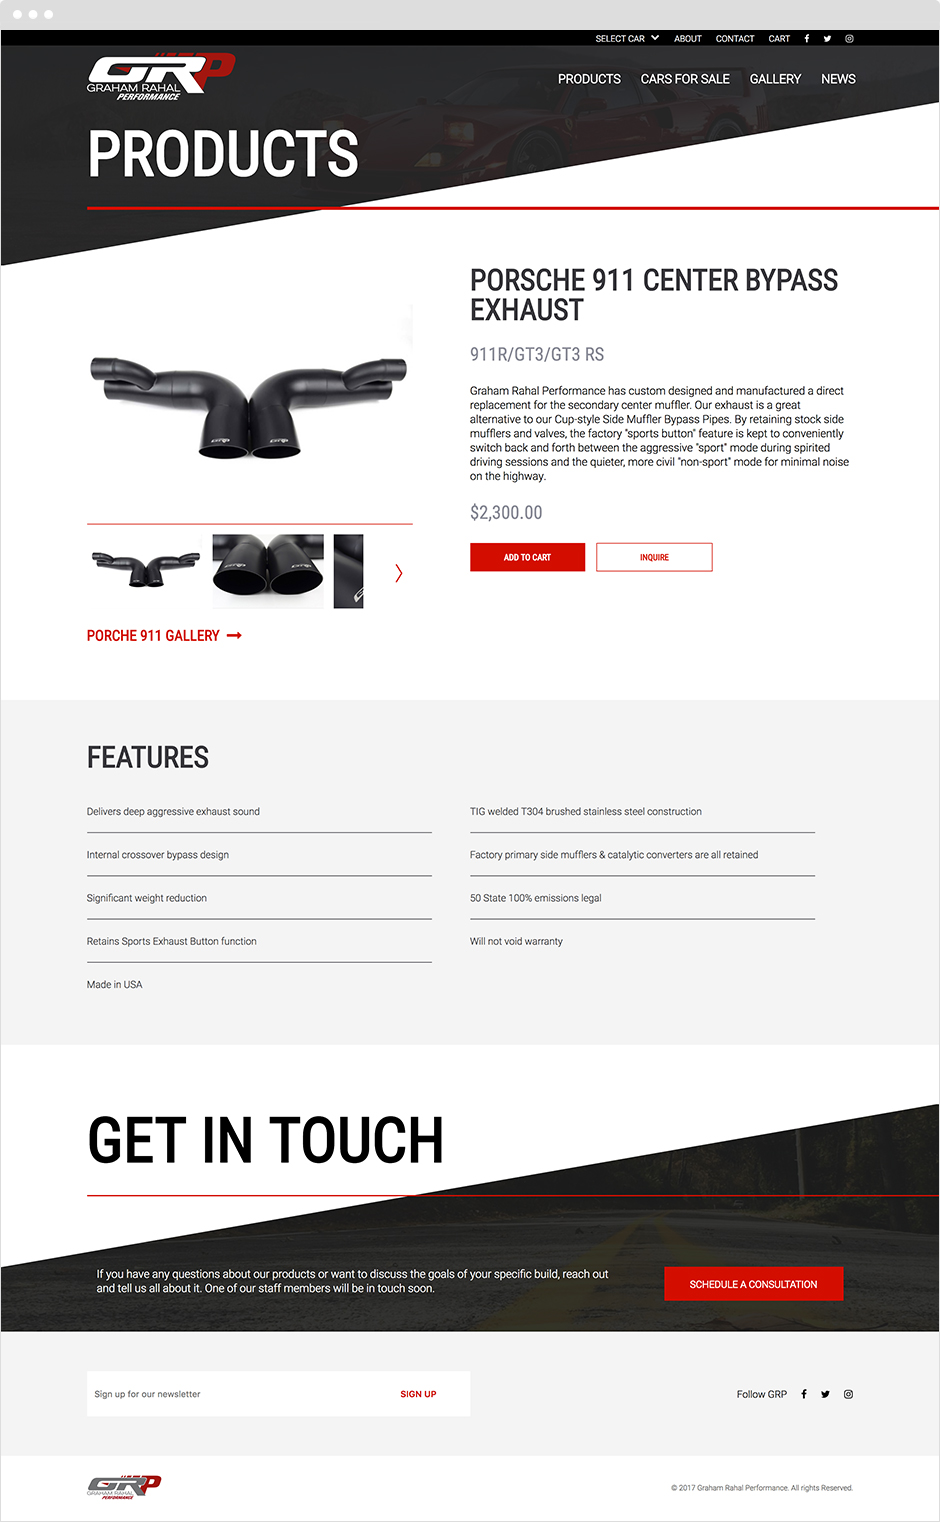 Graham Rahal Performance Product Page